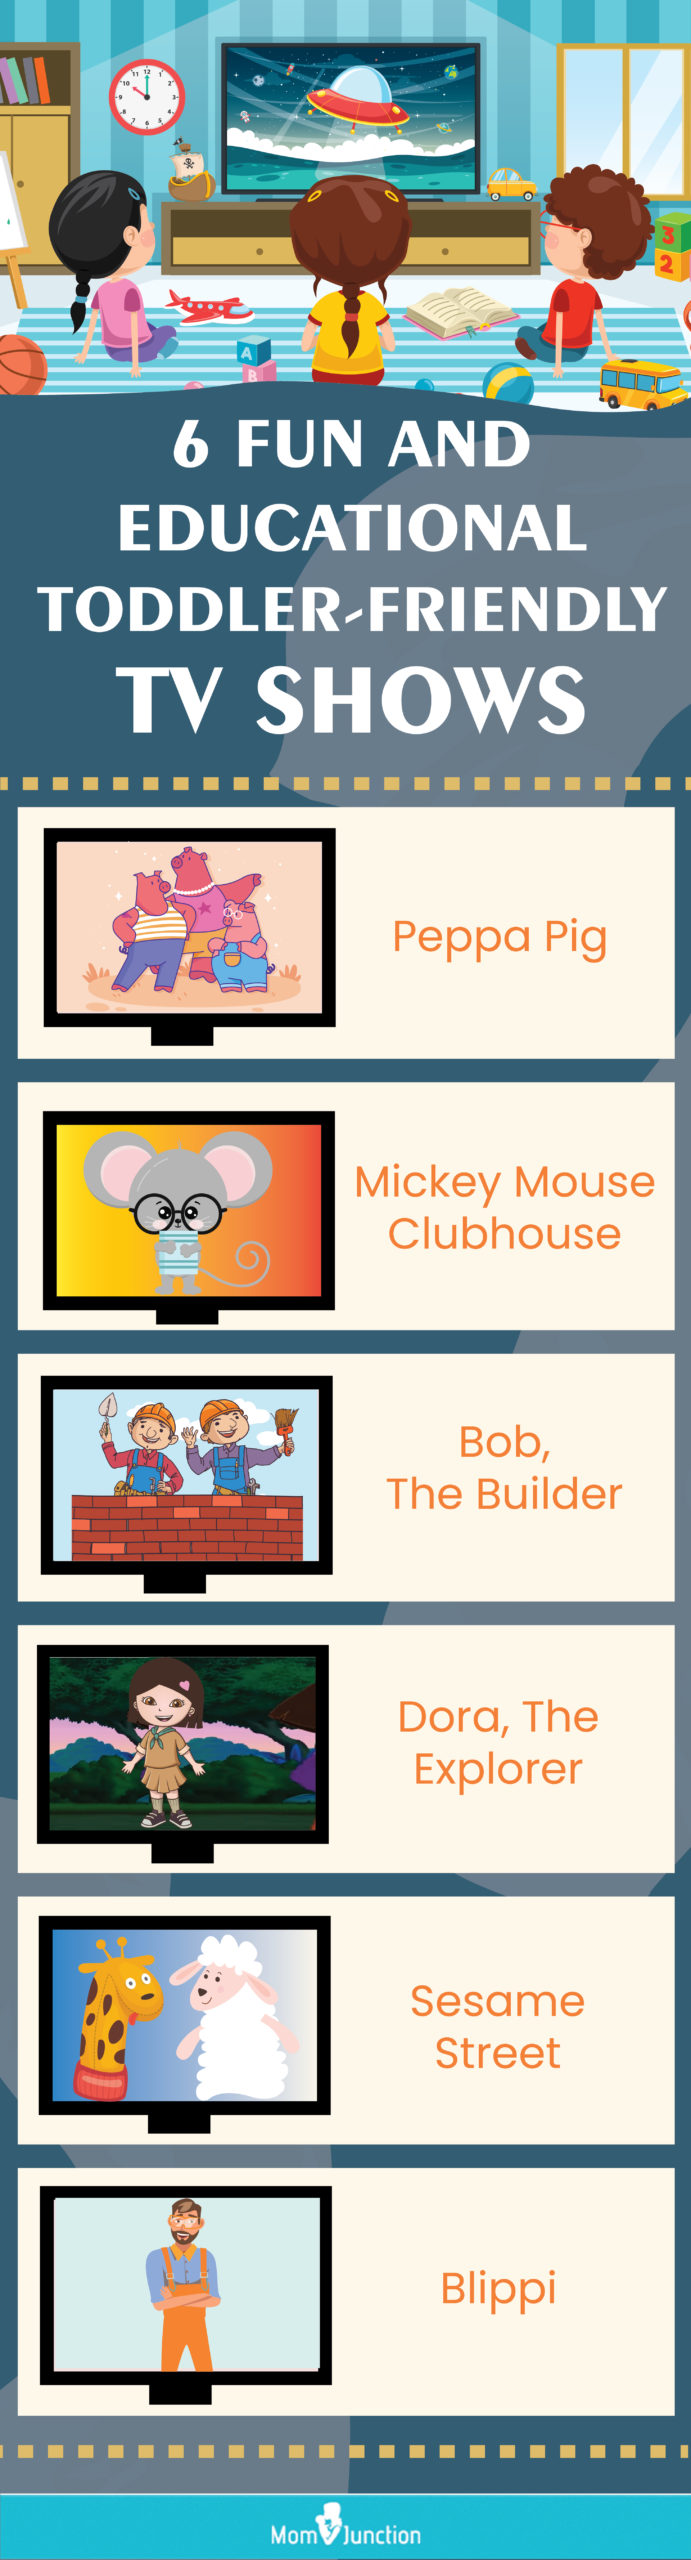 tv shows for toddlers to watch (infographic)